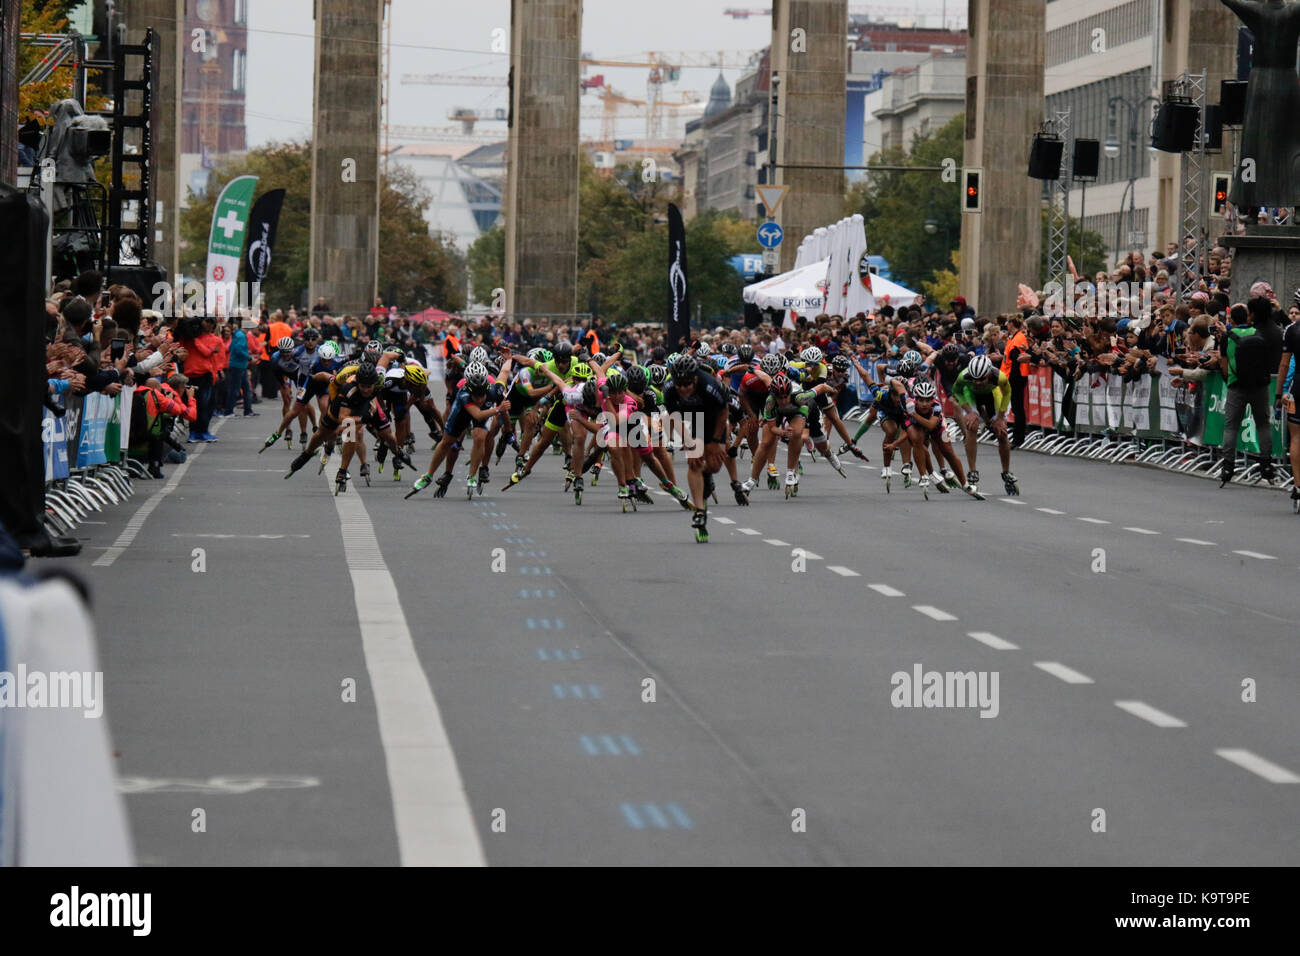 Berlin, Germany. 23rd Sep, 2017. Second place Patxi Peula from Spain crosses the finishing line.Skaters race the last meters of the course from the Brandenburg Gate to the finishing line. Over 5,500 skater took part in the 2017 BMW Berlin Marathon Inline skating race, a day ahead of the Marathon race. Bart Swings from Belgium won the race in 58:42 for the 5th year in a row. Credit: Michael Debets/Pacific Press/Alamy Live News Stock Photo